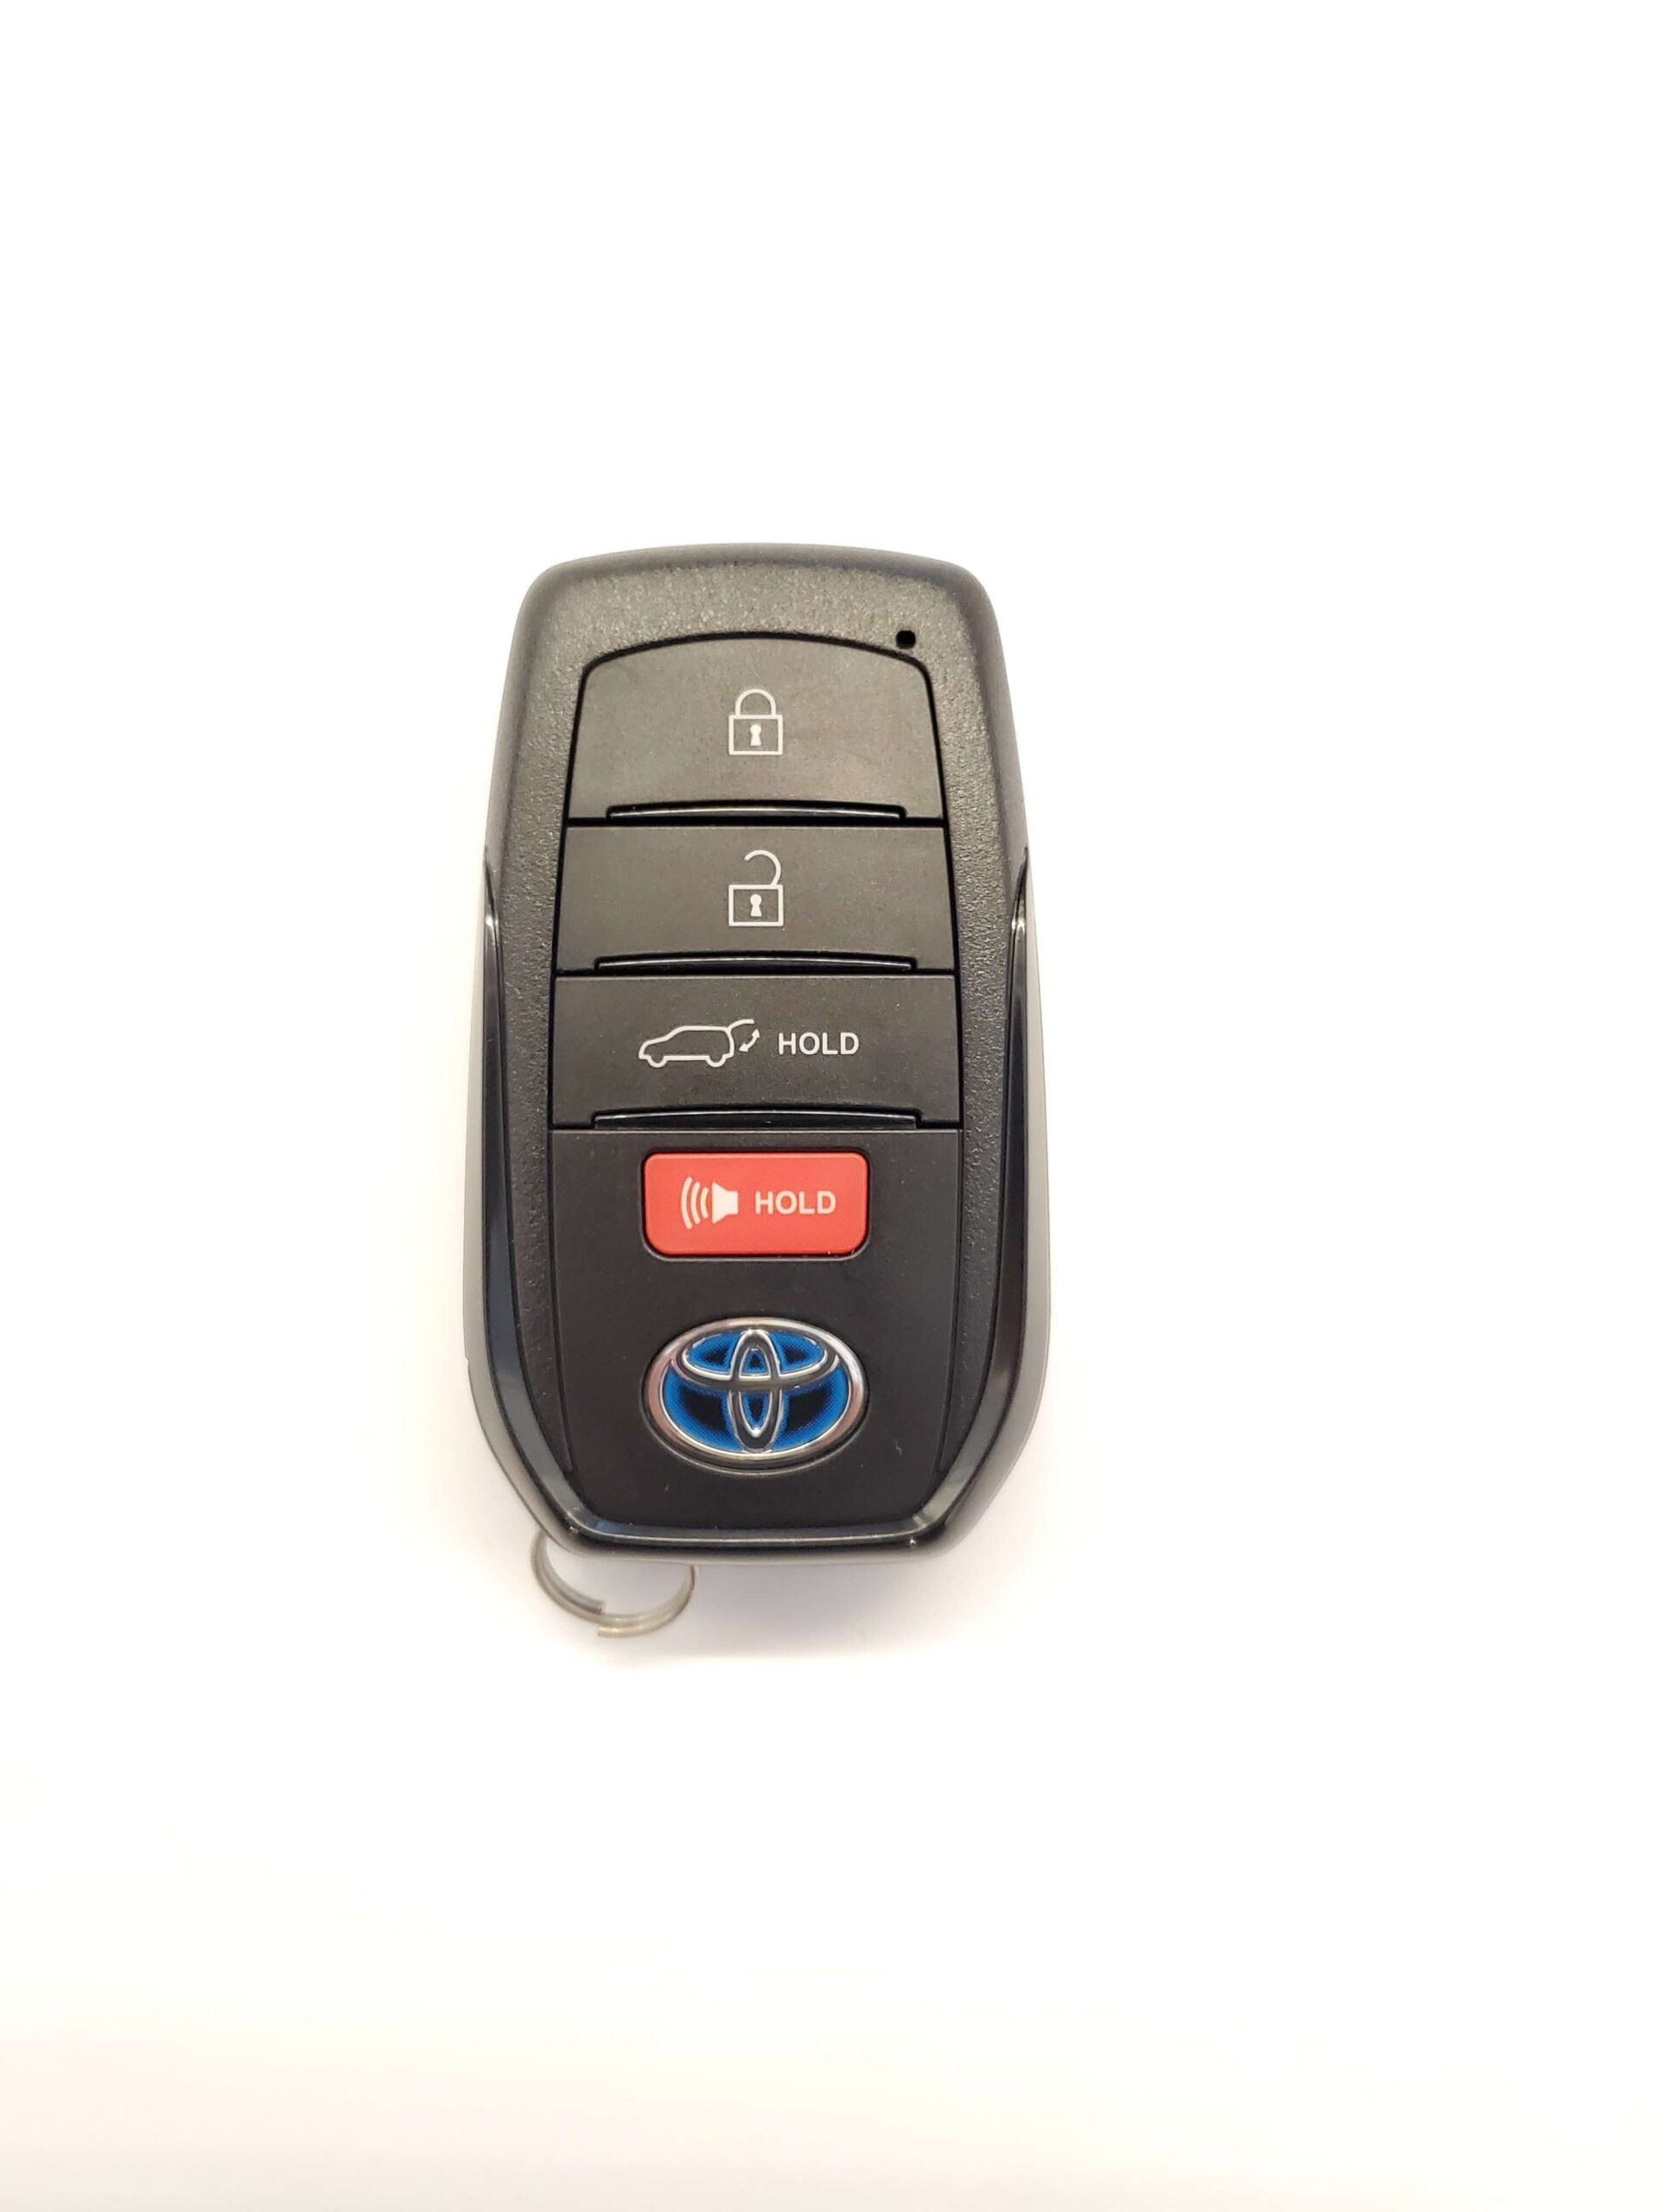 Toyota Keys Replacement What To Do, Options, Costs, Tips & More